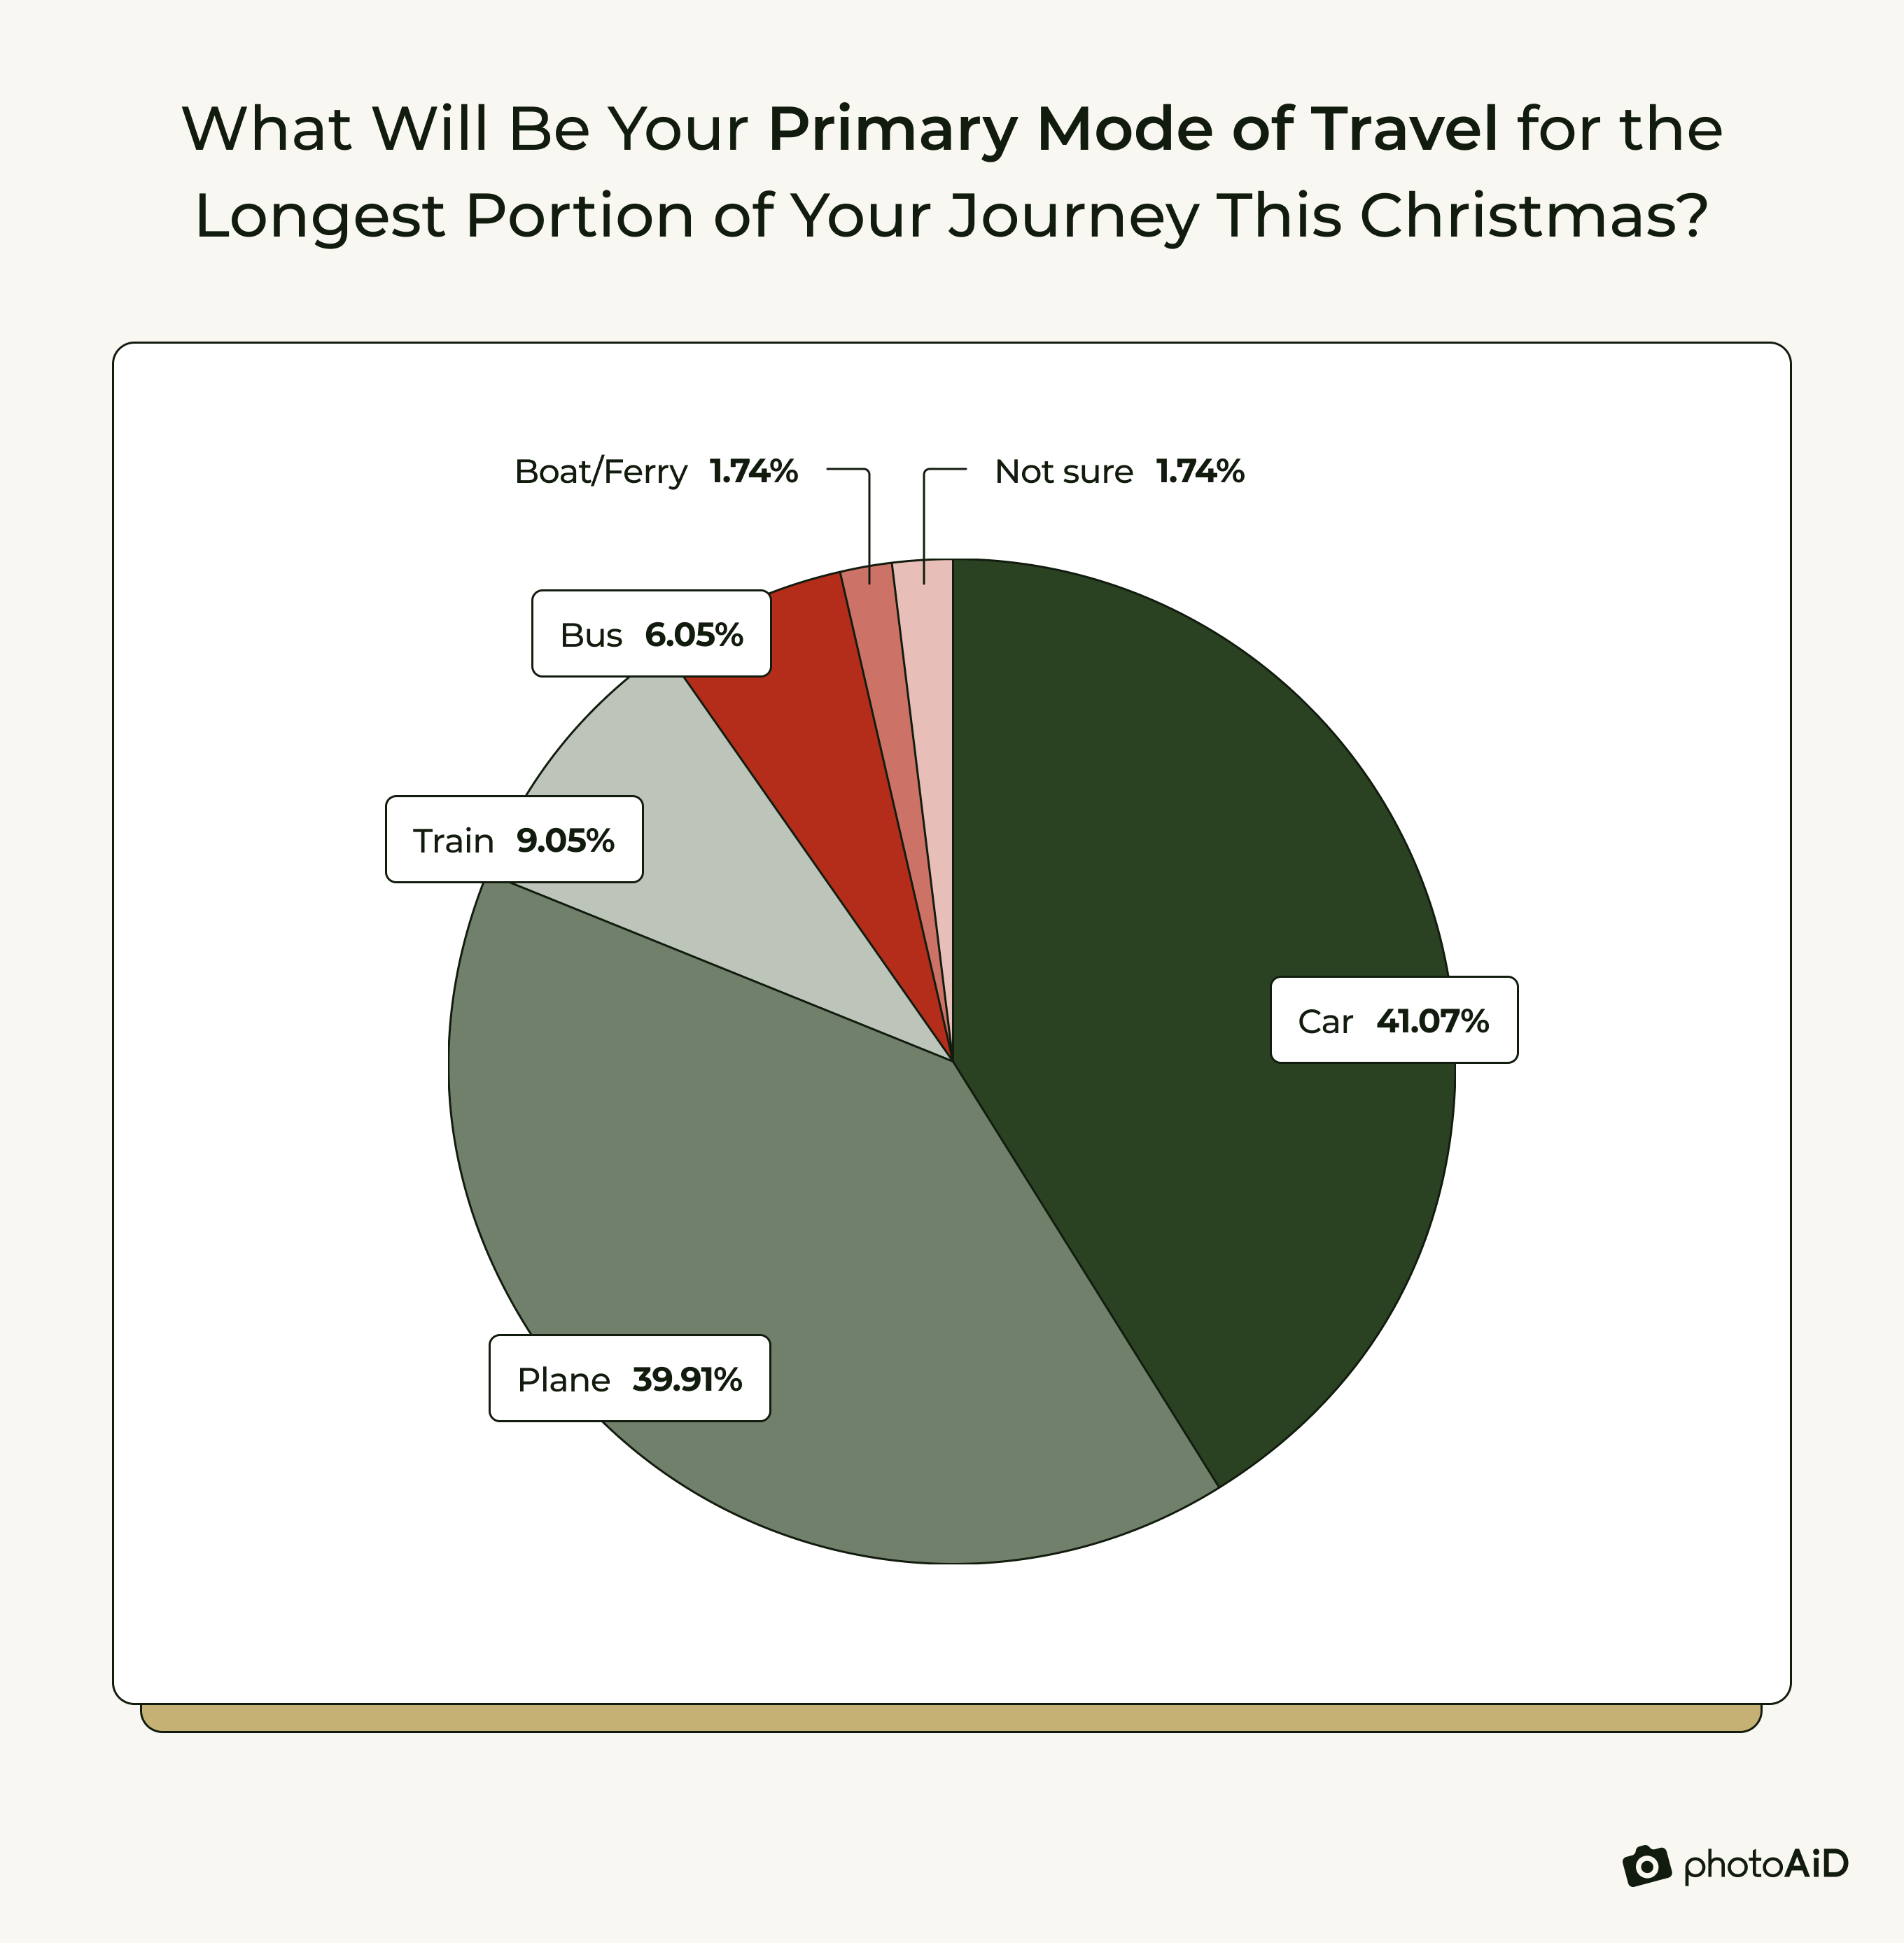 Travel modes during Christmas, with cars and planes being the most popular choices